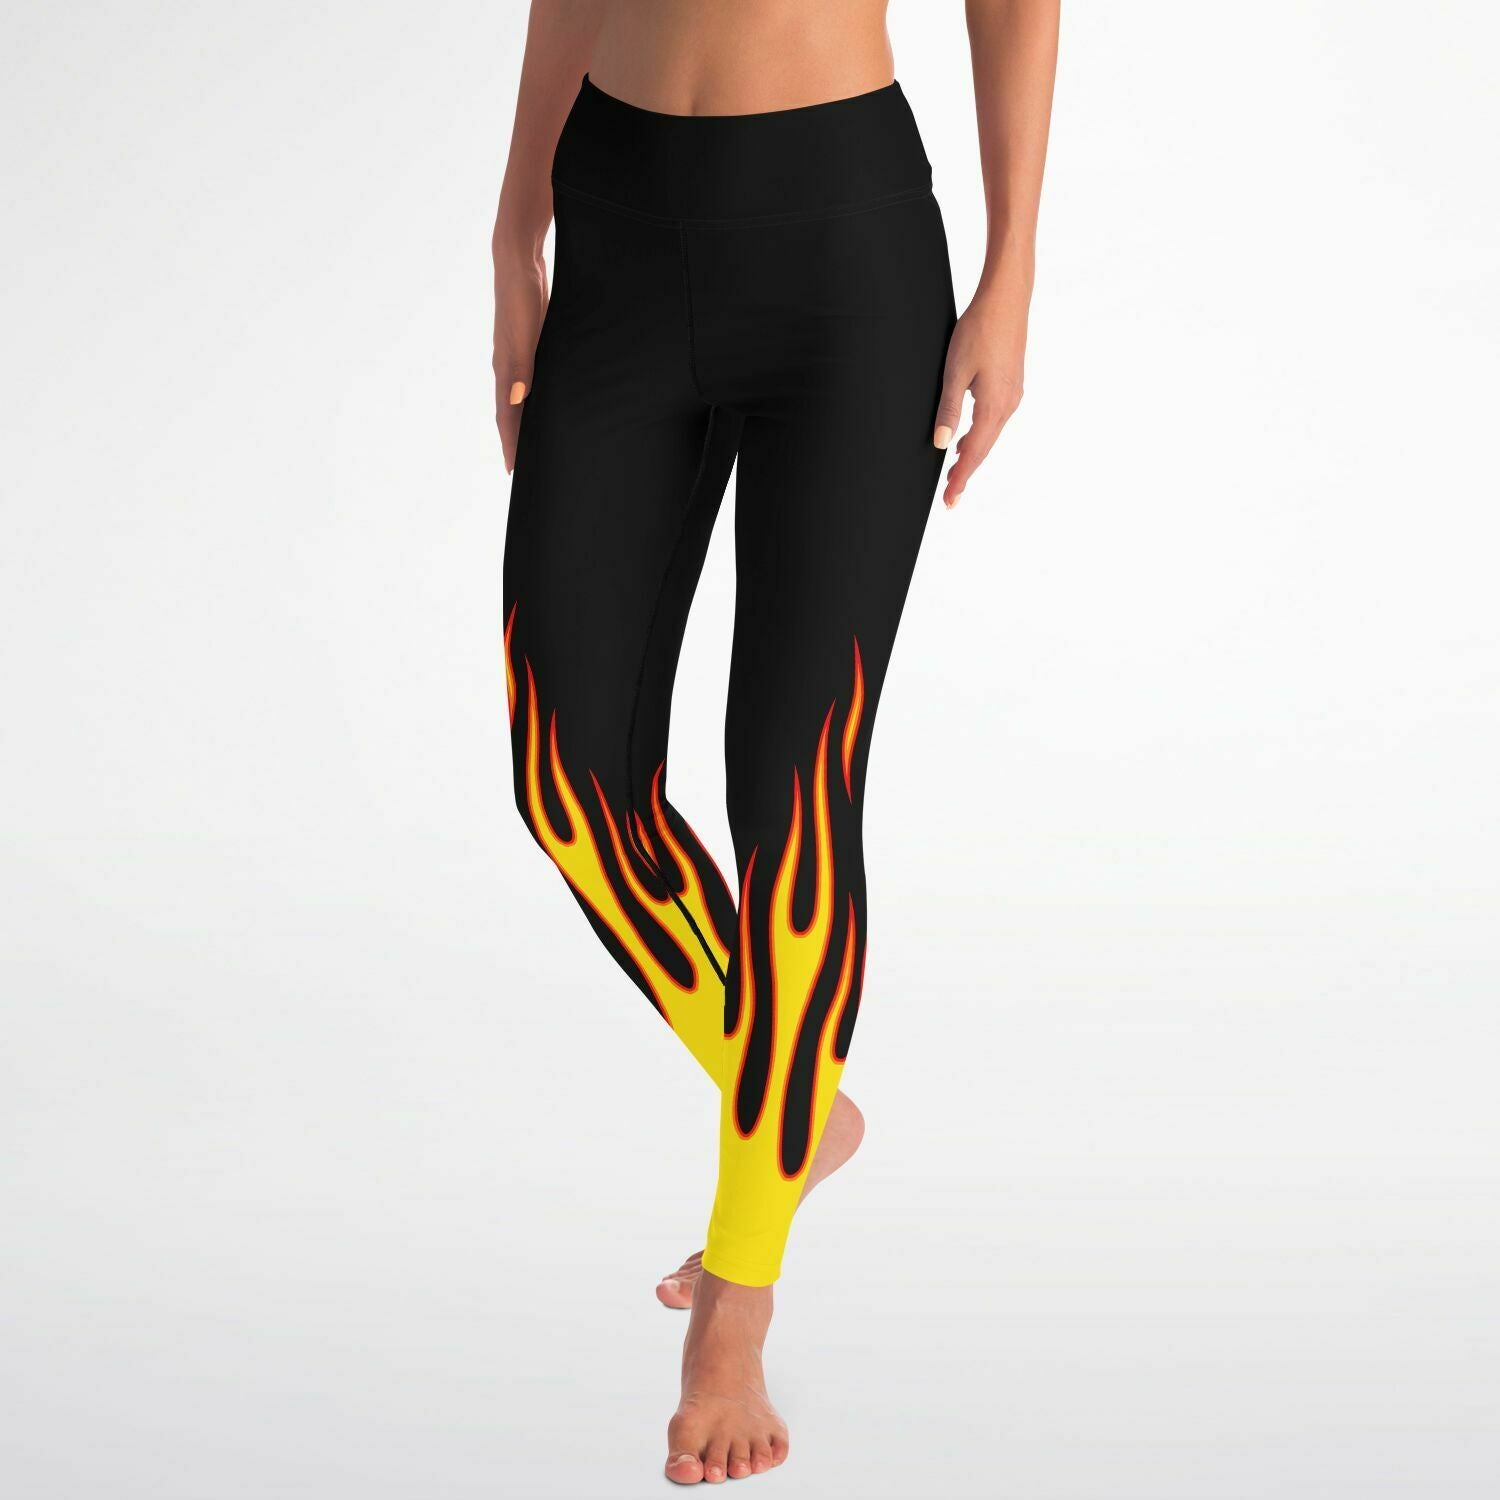 Women's Classic Hot Rod Fire Flames High-waisted Yoga Leggings Front View